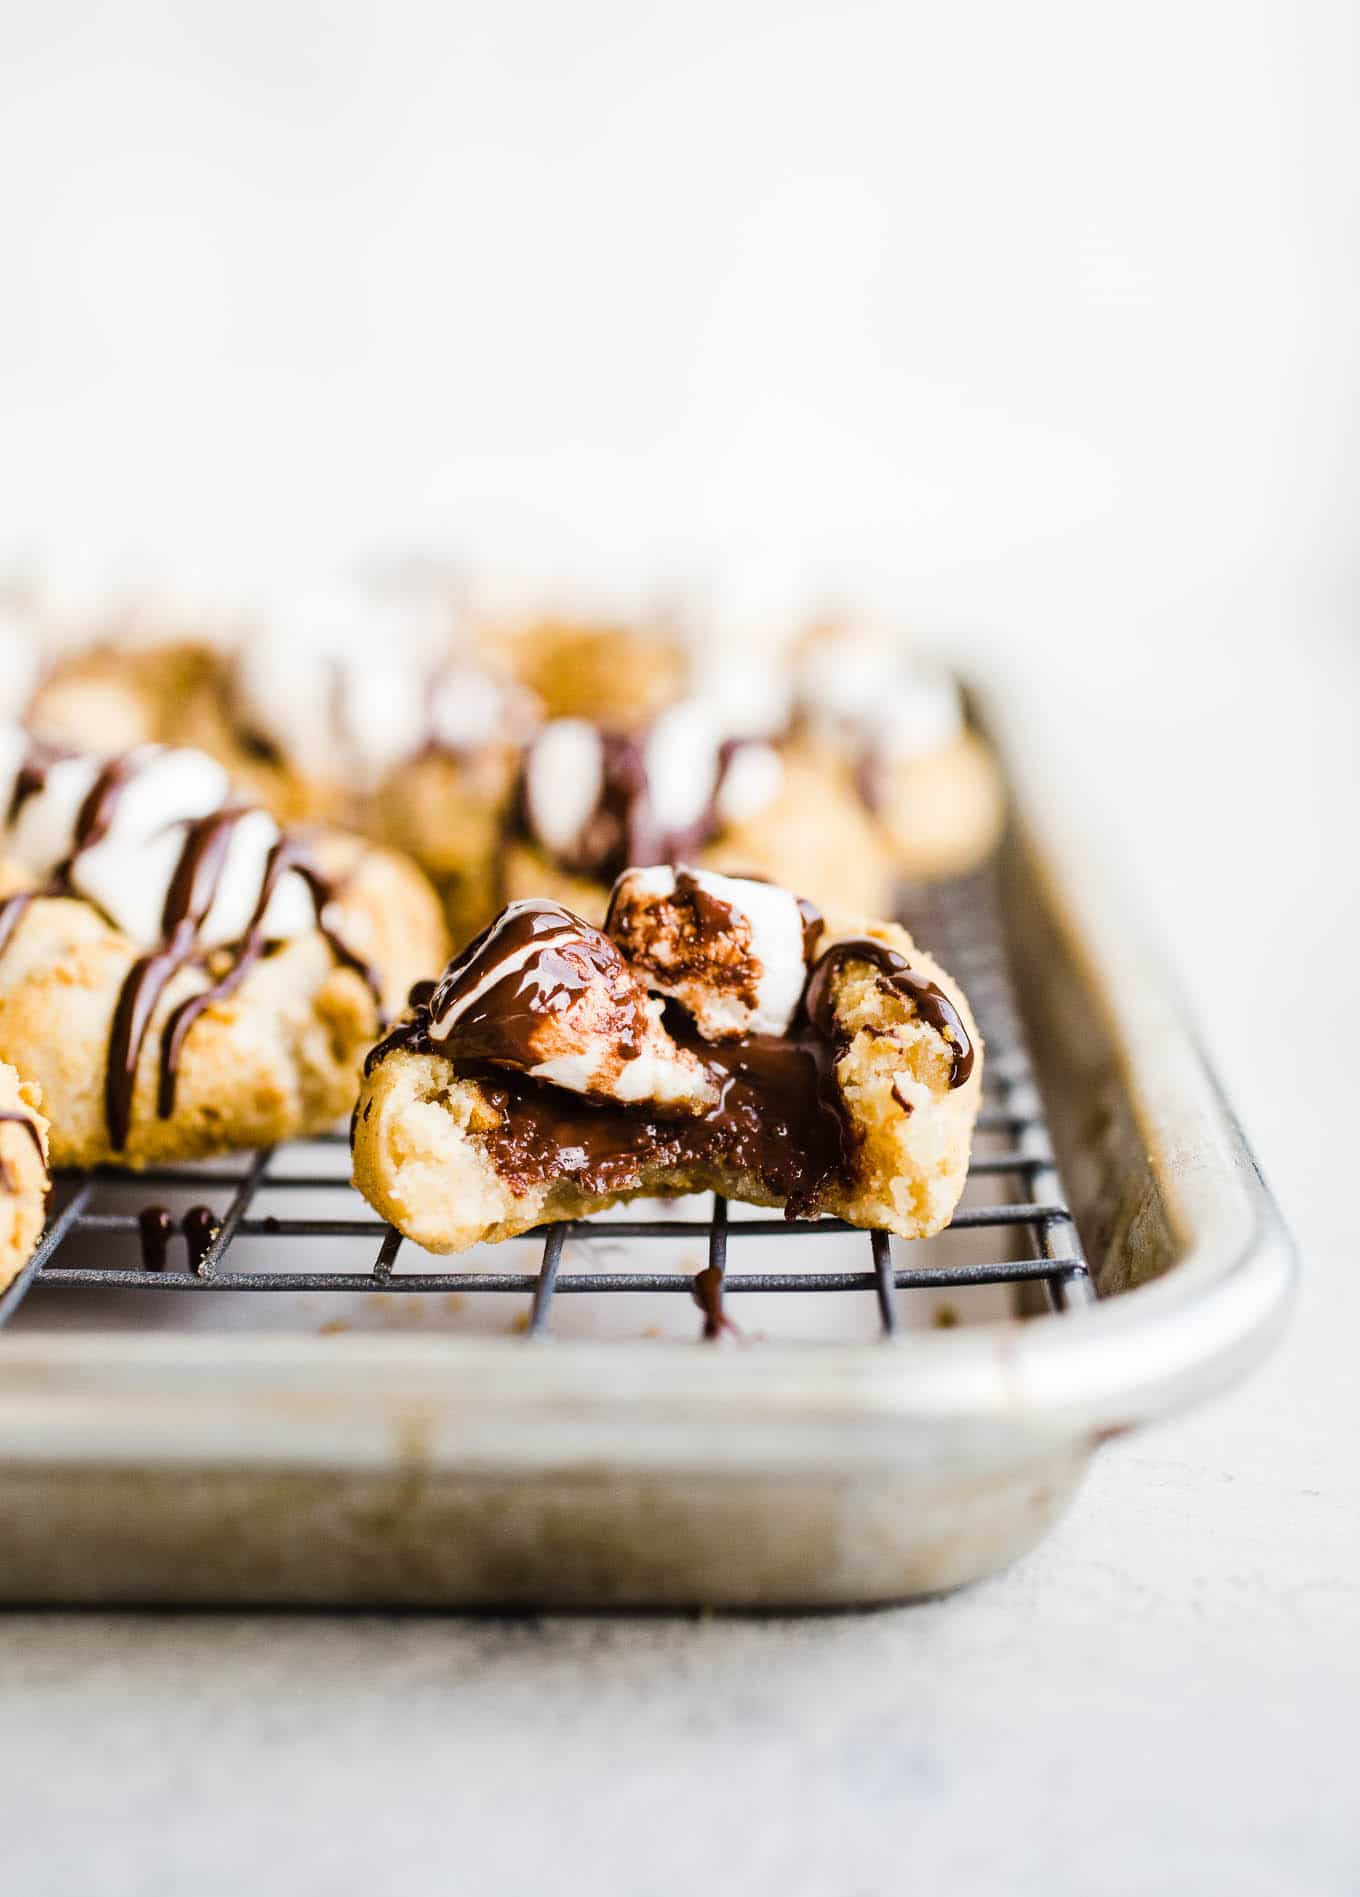 Thumbprint cookies with chocolate and marshmallows.